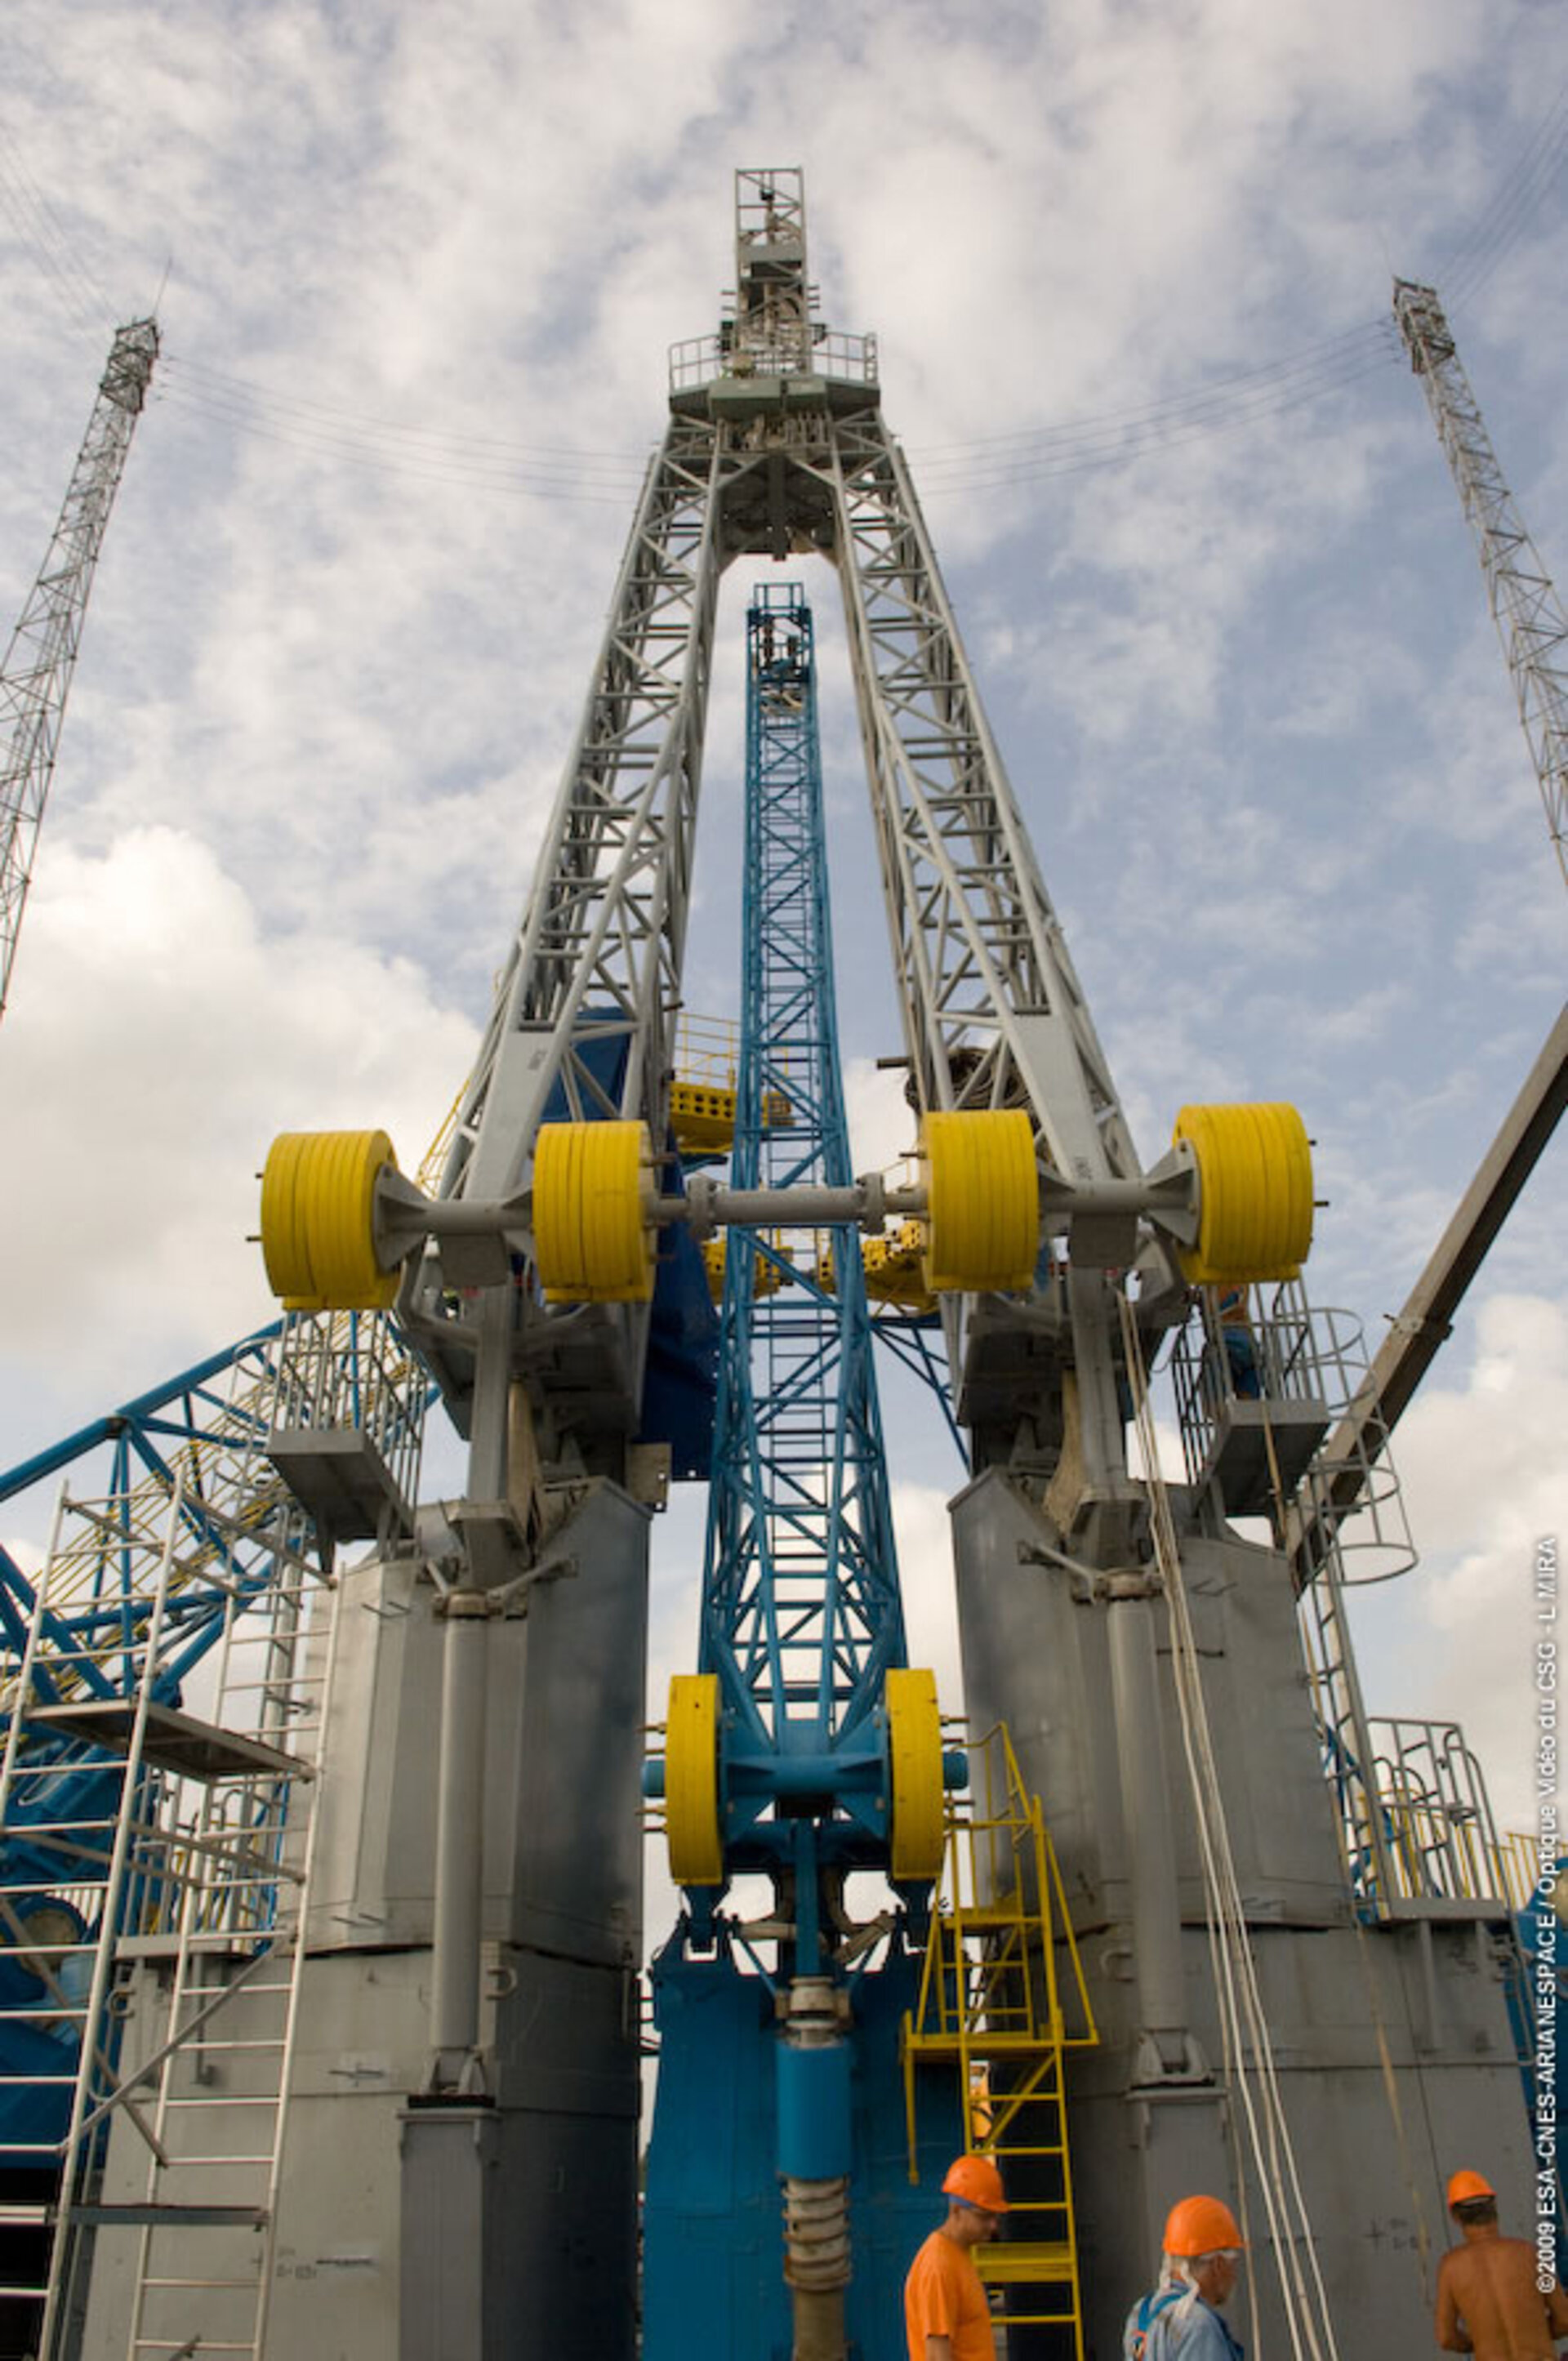 Umbilical masts on the Soyuz launch pad